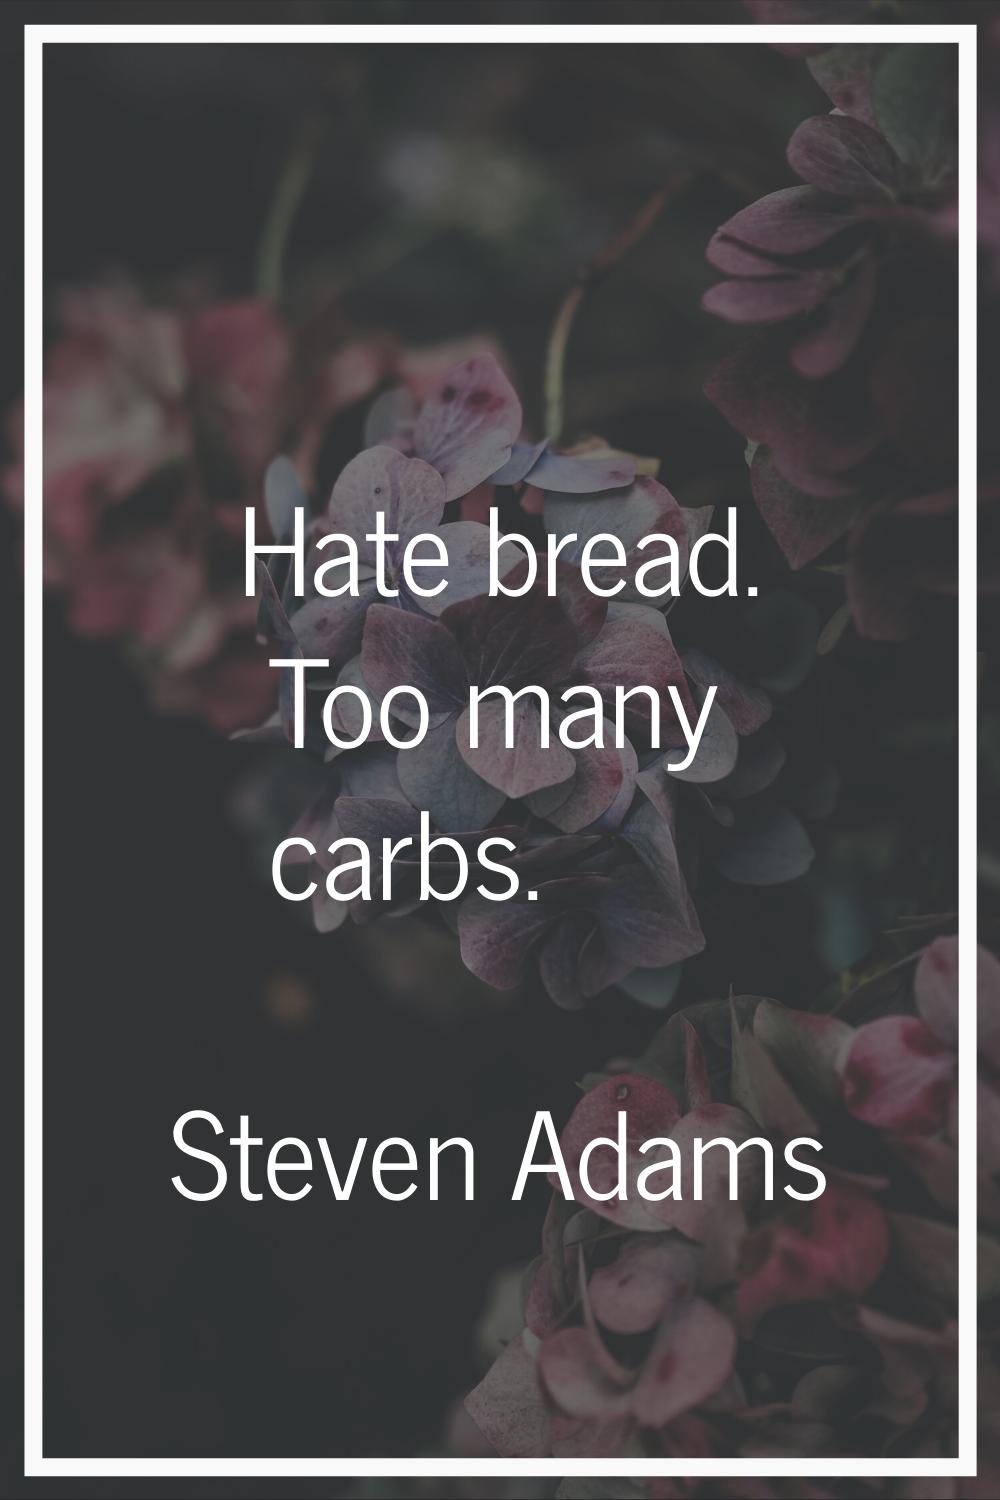 Hate bread. Too many carbs.